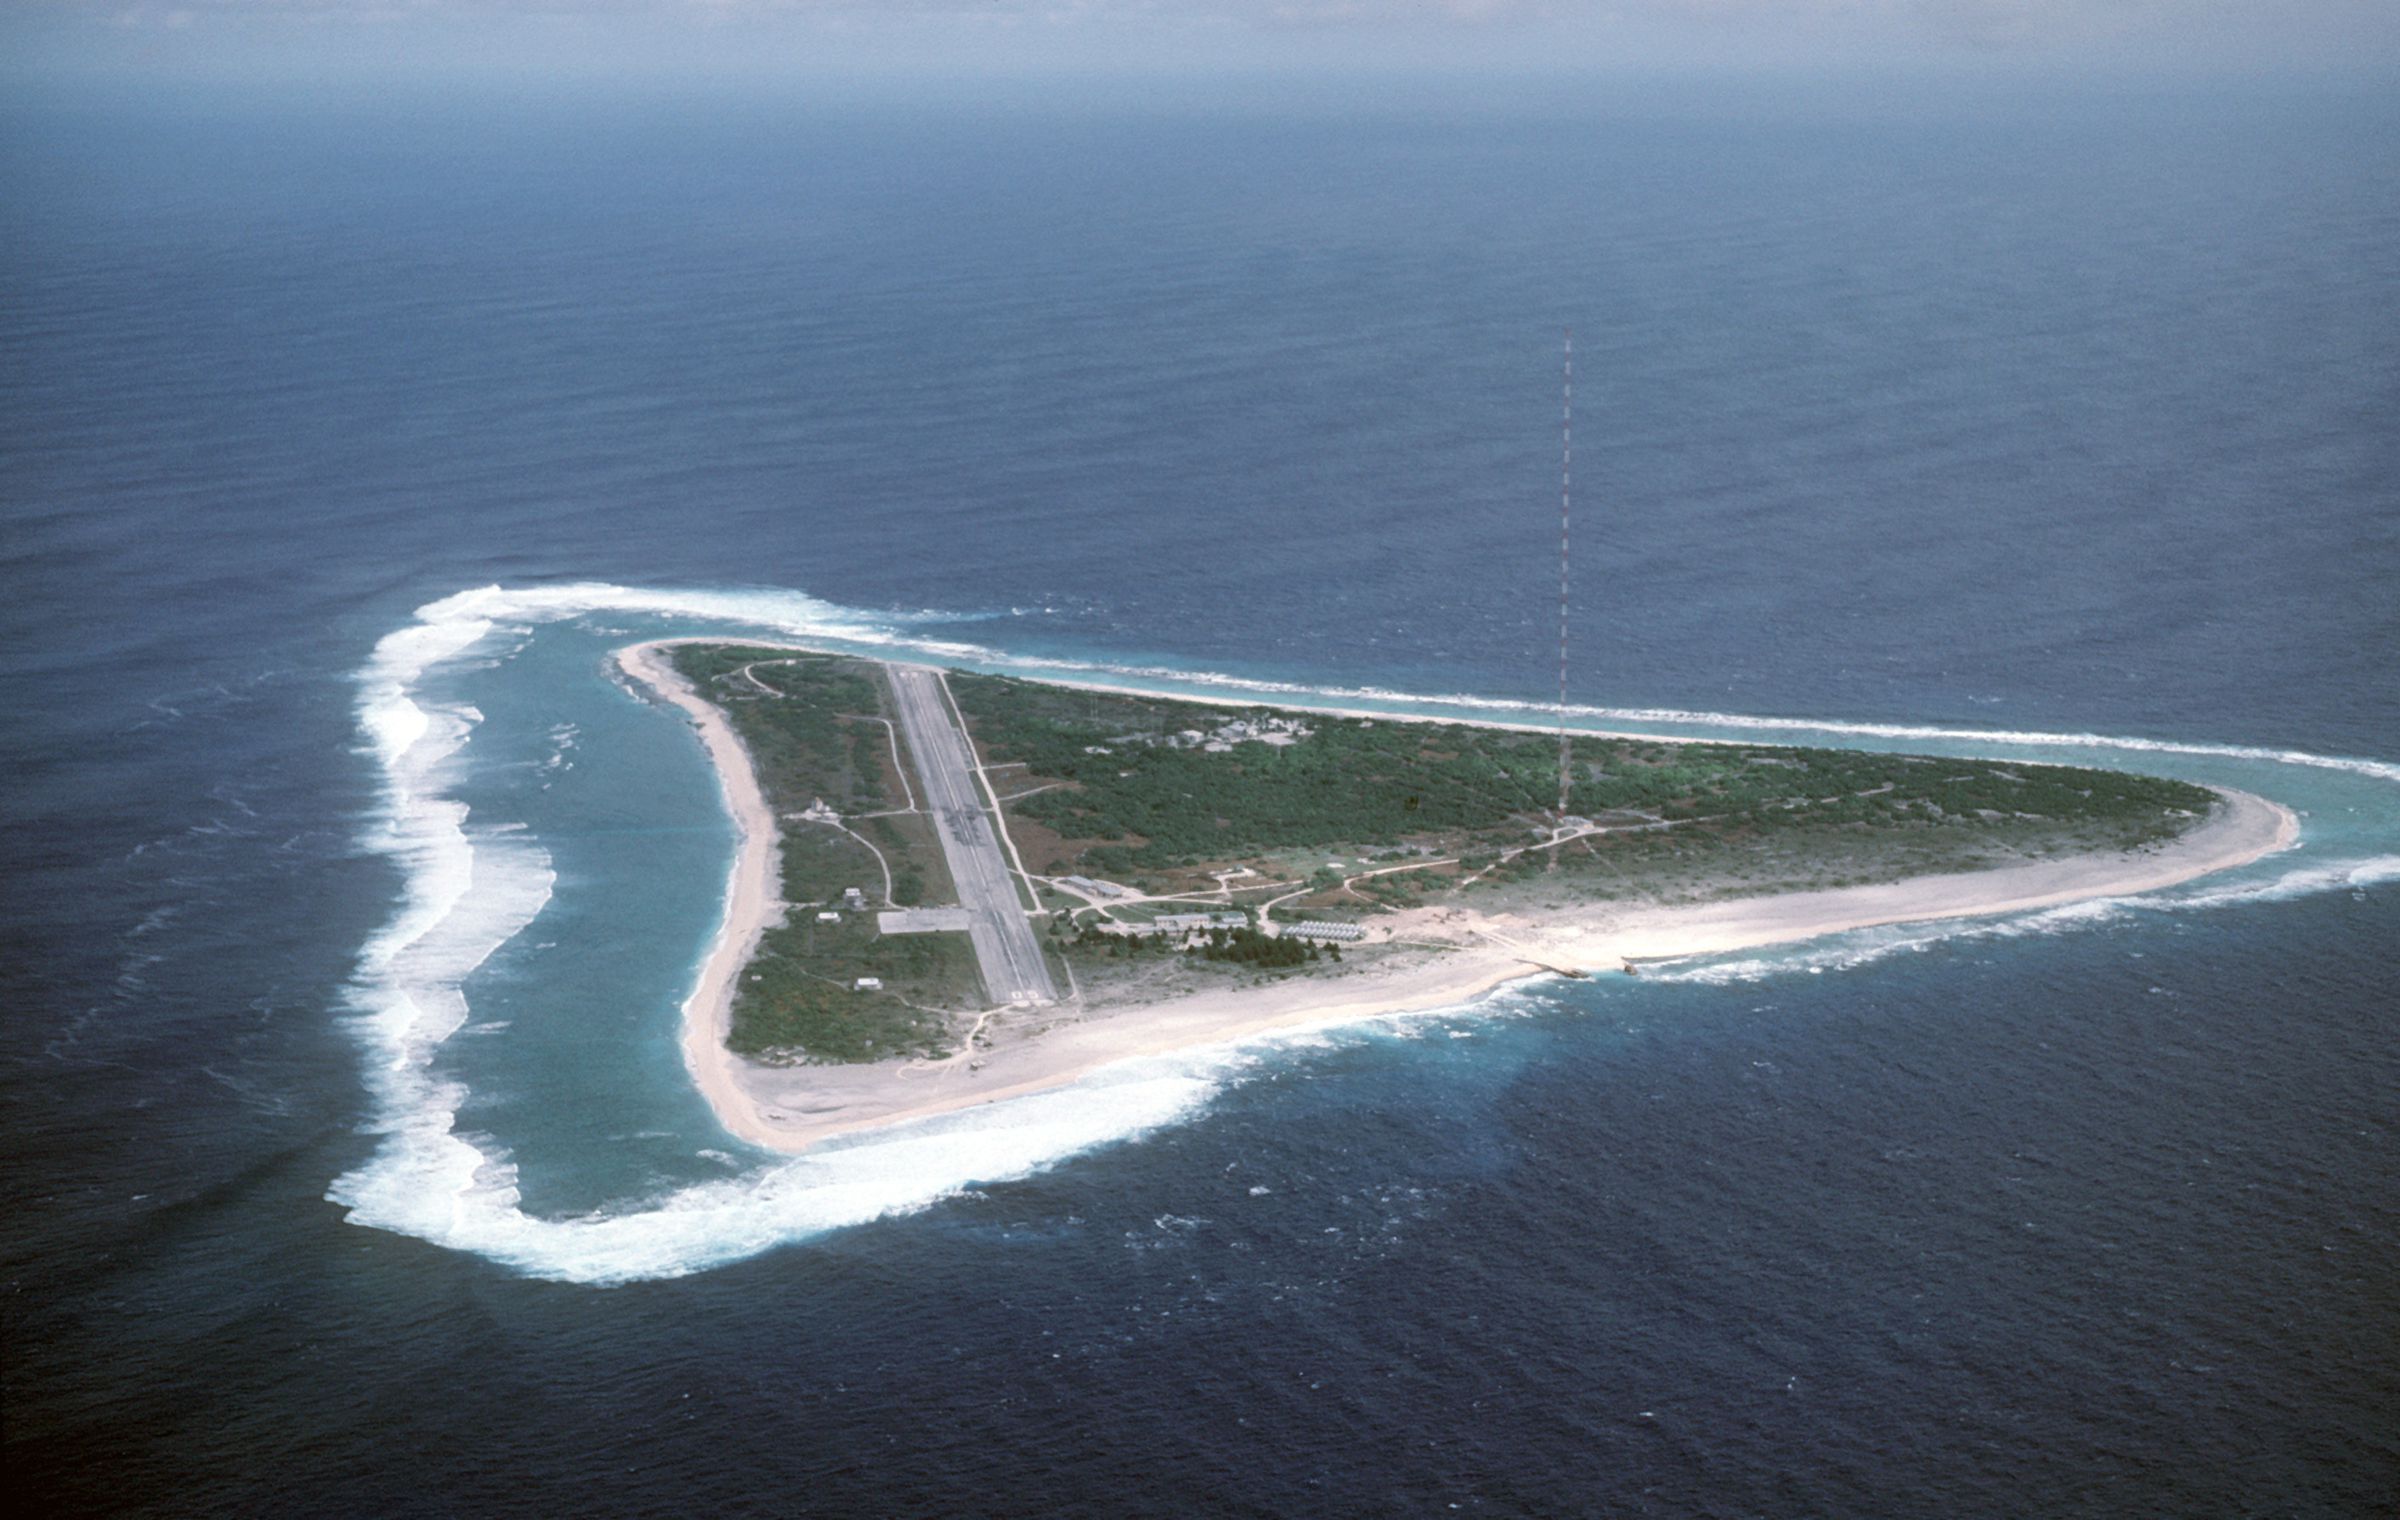 An aerial view of Minamitori Island taken in 1987. The rare earth ores were discovered in the seabed near the island.